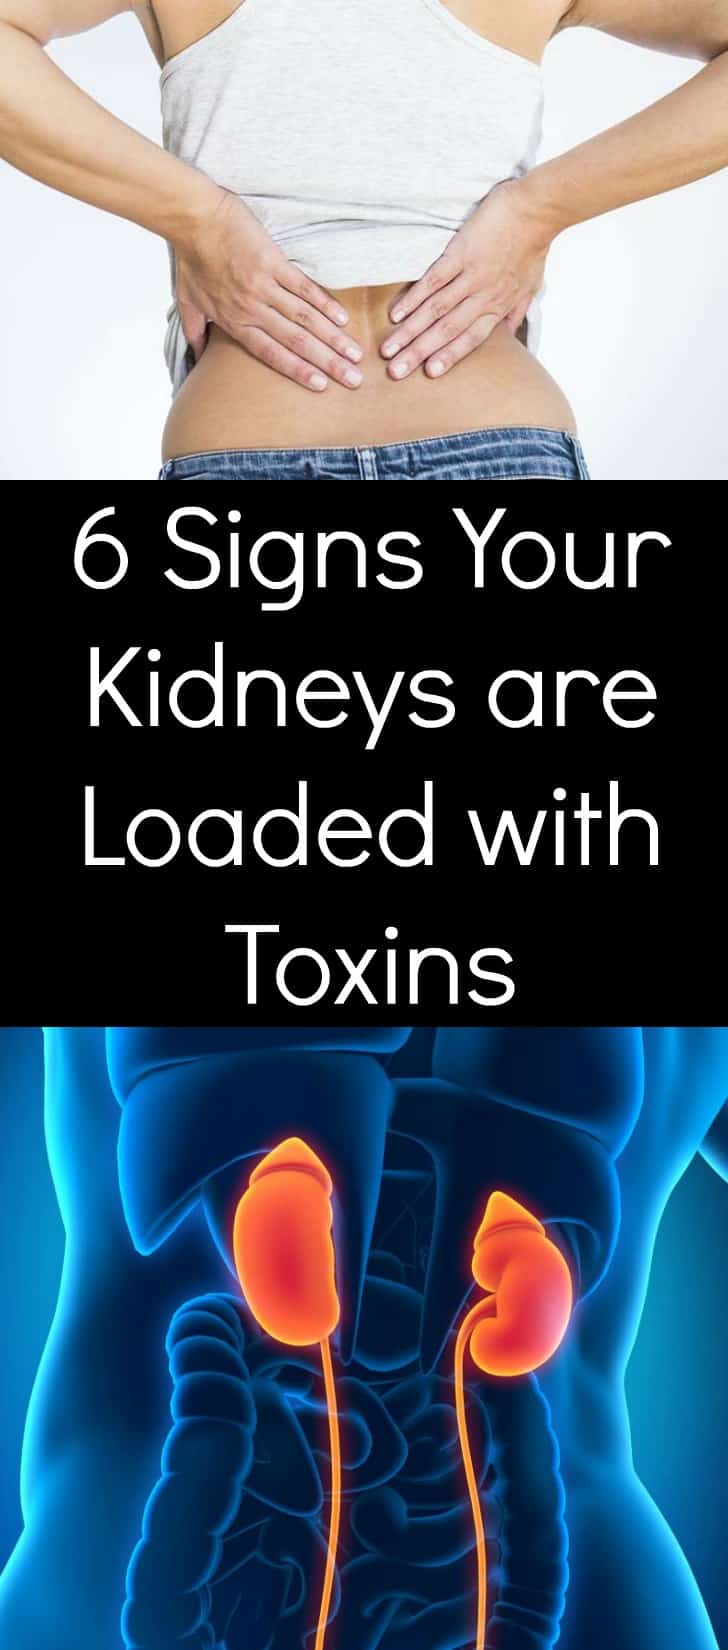 6 Signs Your Kidneys are Loaded with Toxins